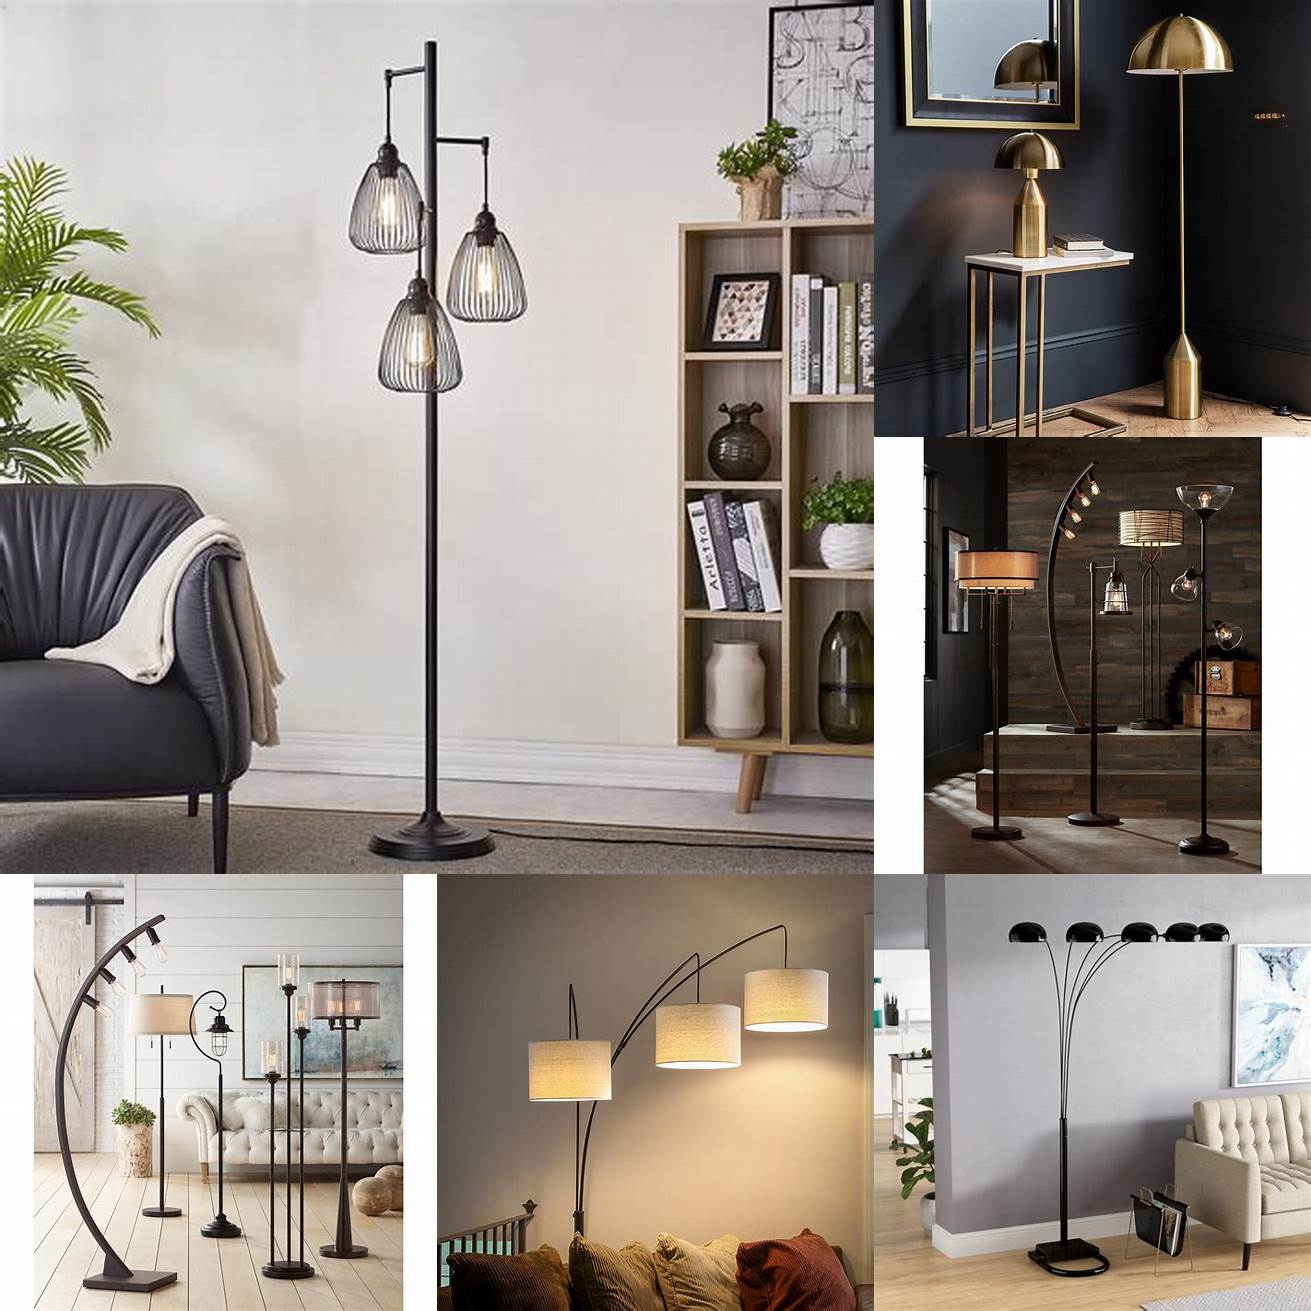 Floor lamps Floor lamps are a versatile lighting option that can be used in any room They can provide a soft warm light for reading or create a bright cheerful atmosphere for entertaining